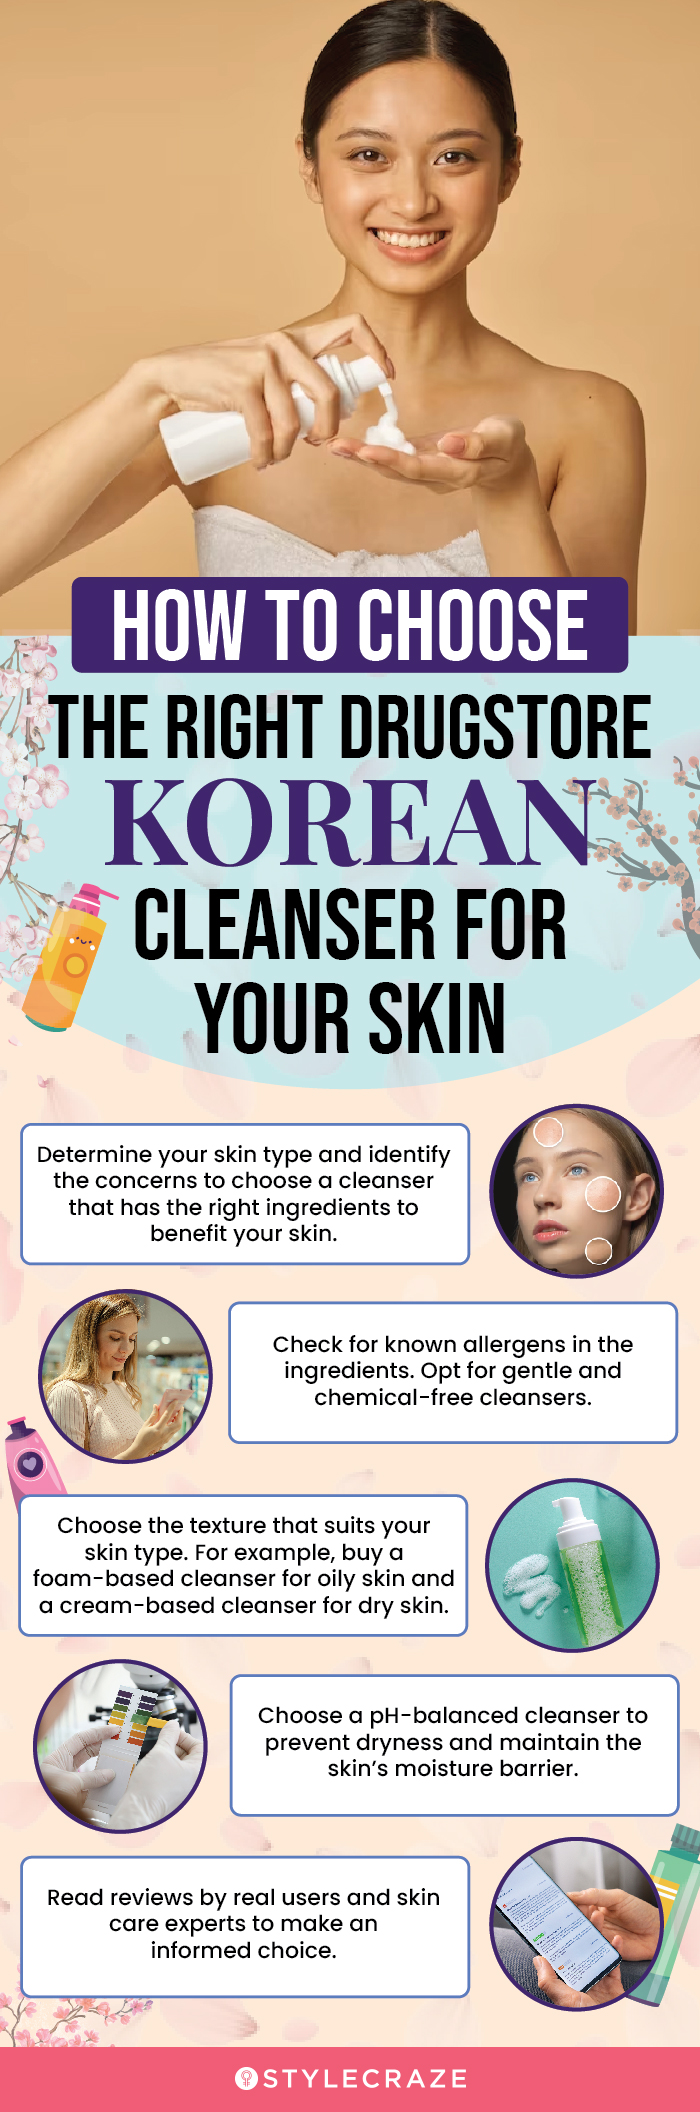 How To Choose The Right Drugstore Korean Cleanser (infographic)